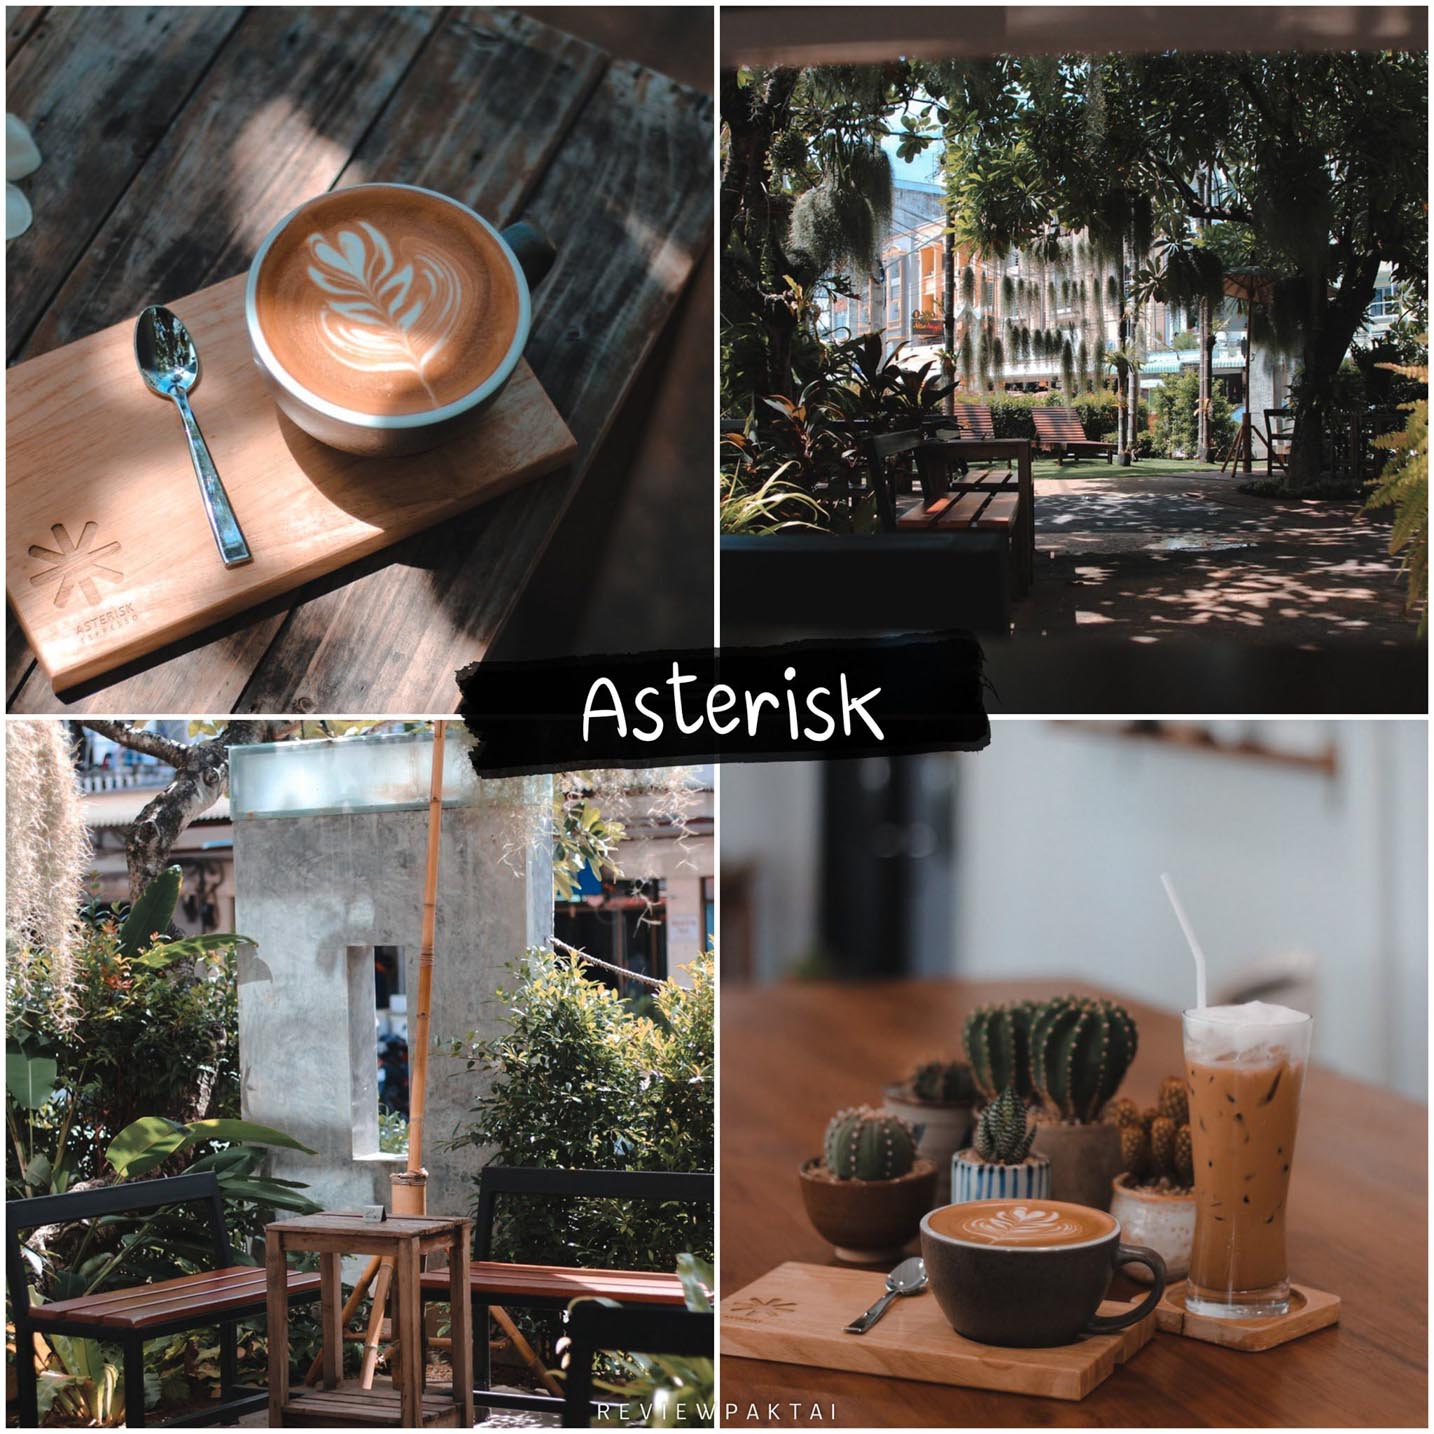 Asterisk espresso, check-in point in Phuket, good coffee, the shop is good at coffee. Coffee lovers will definitely be delighted here. The shop has many varieties of coffee to choose from for you to try. If you don't come, you'll miss out a lot, Mom!!